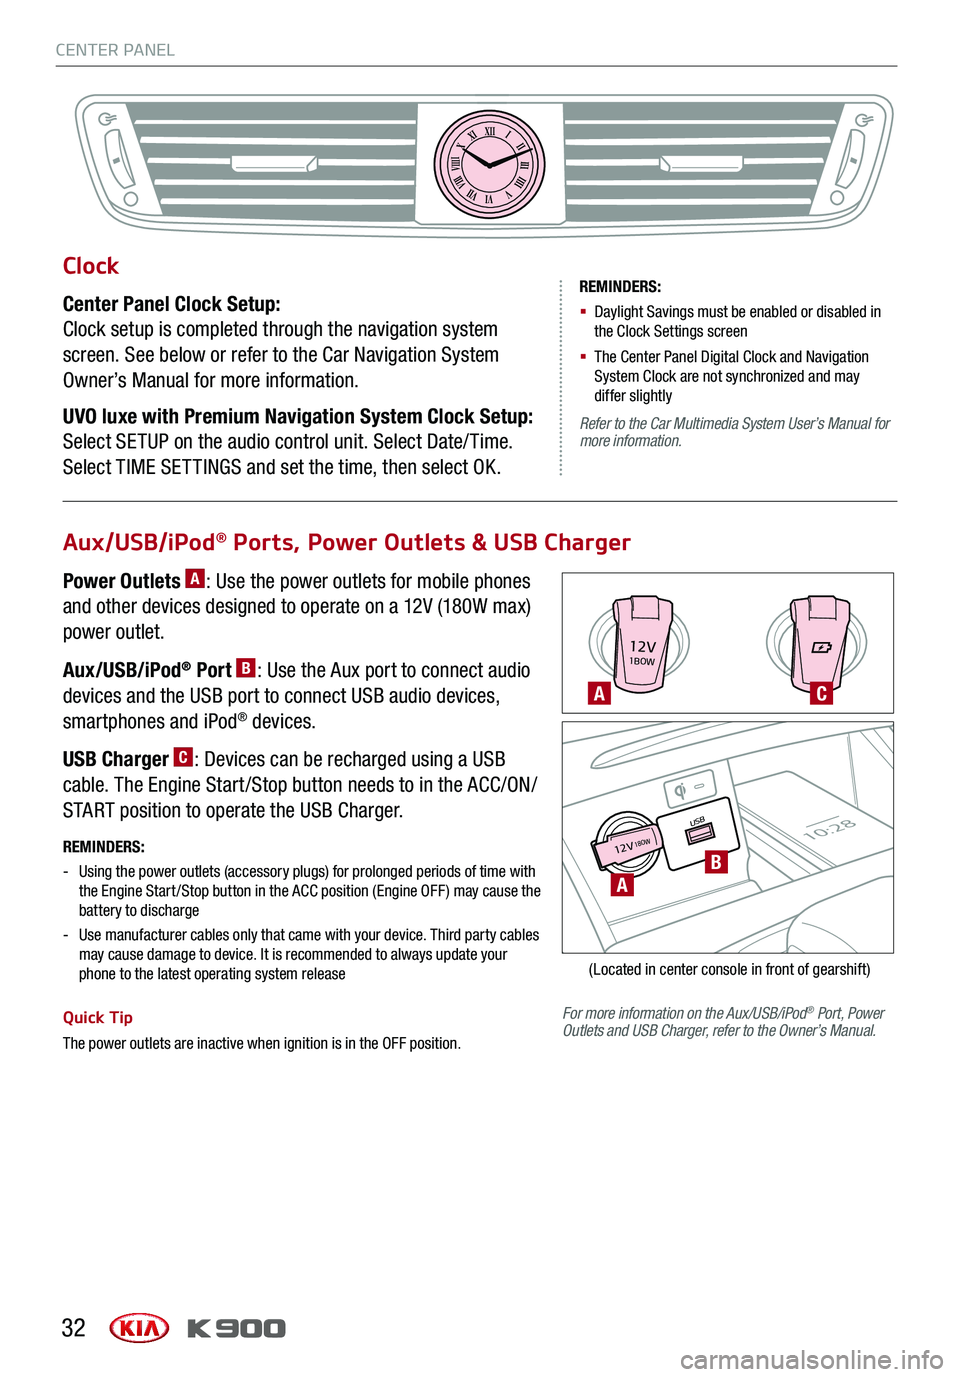 KIA K900 2019  Features and Functions Guide CENTER PANEL
32
12V1BOW
USB10:2812V18OW
For more information on the Aux/USB/iPod® Port, Power Outlets and USB Charger, refer to the Owner’s Manual.
REMINDERS: 
 - 
Using the power outlets (accessor